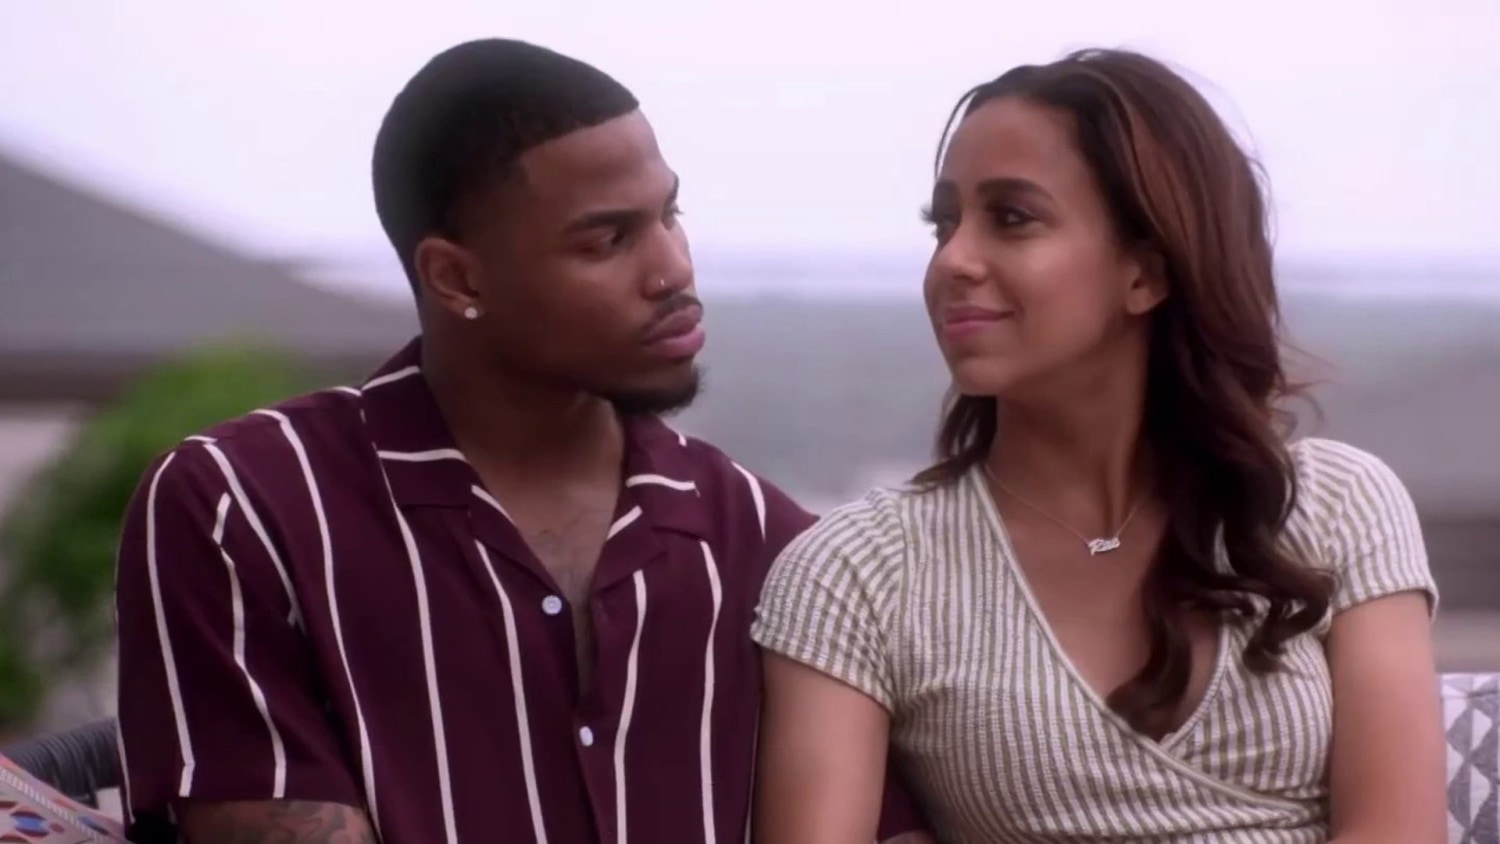 16 Dating Shows to Watch After Finishing Love Is Blind